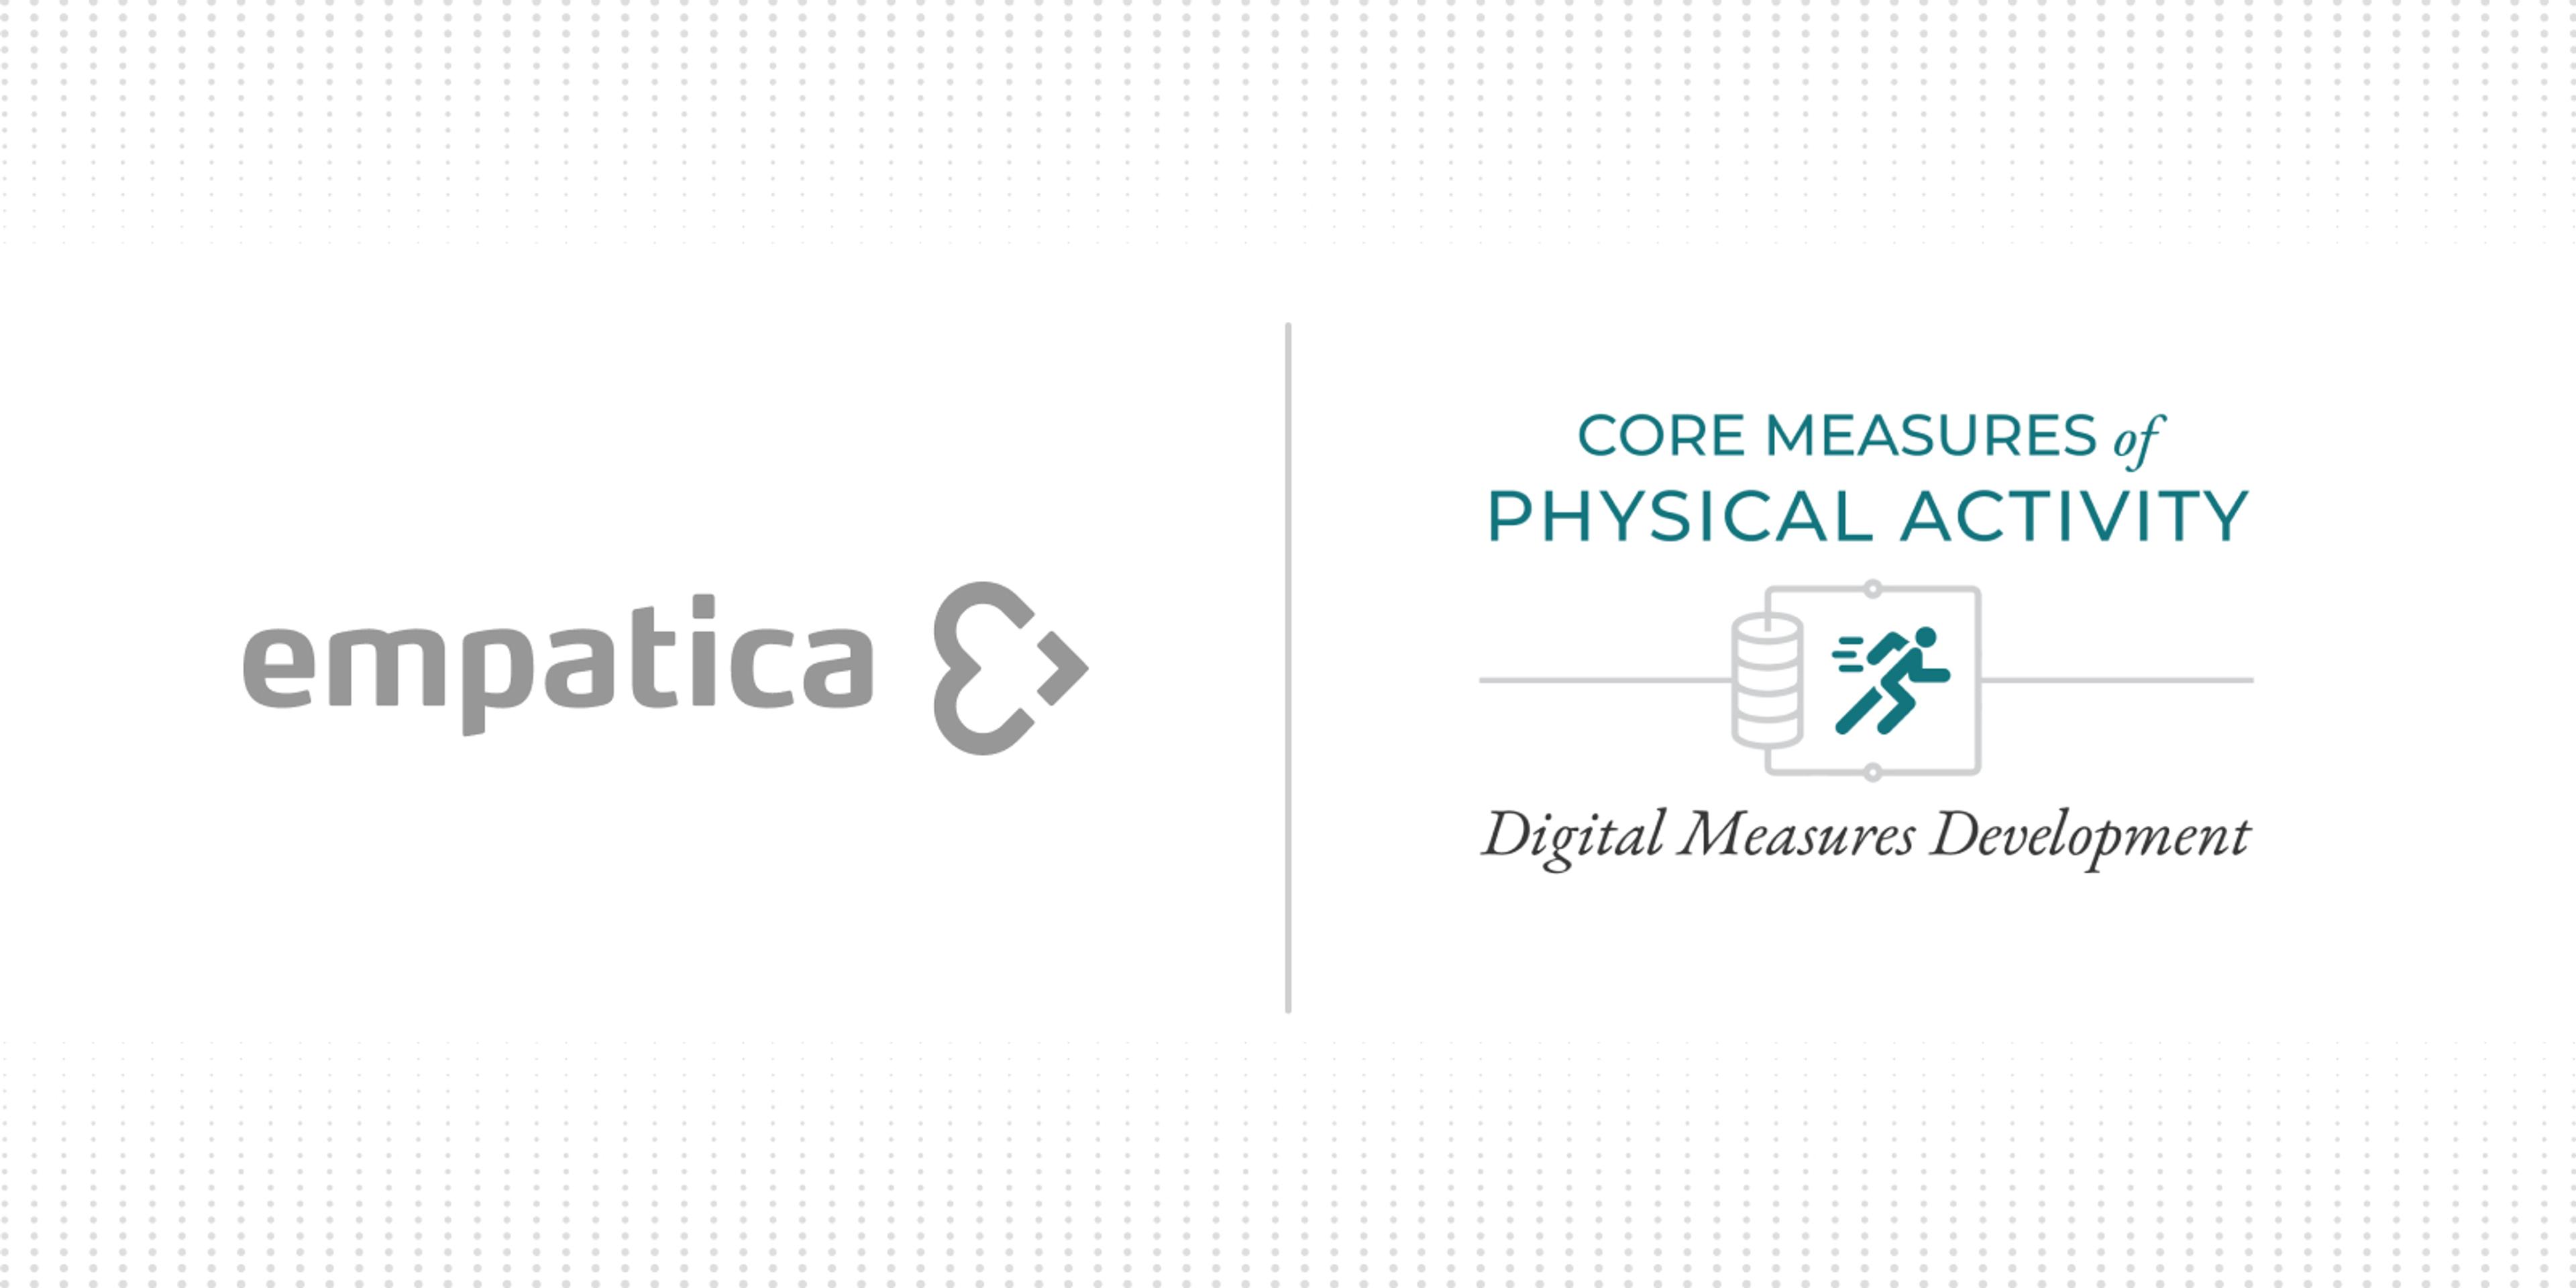 empatica-joining-dime-in-developing-a-core-set-of-digital-measures-for-physical-activity-cover-image